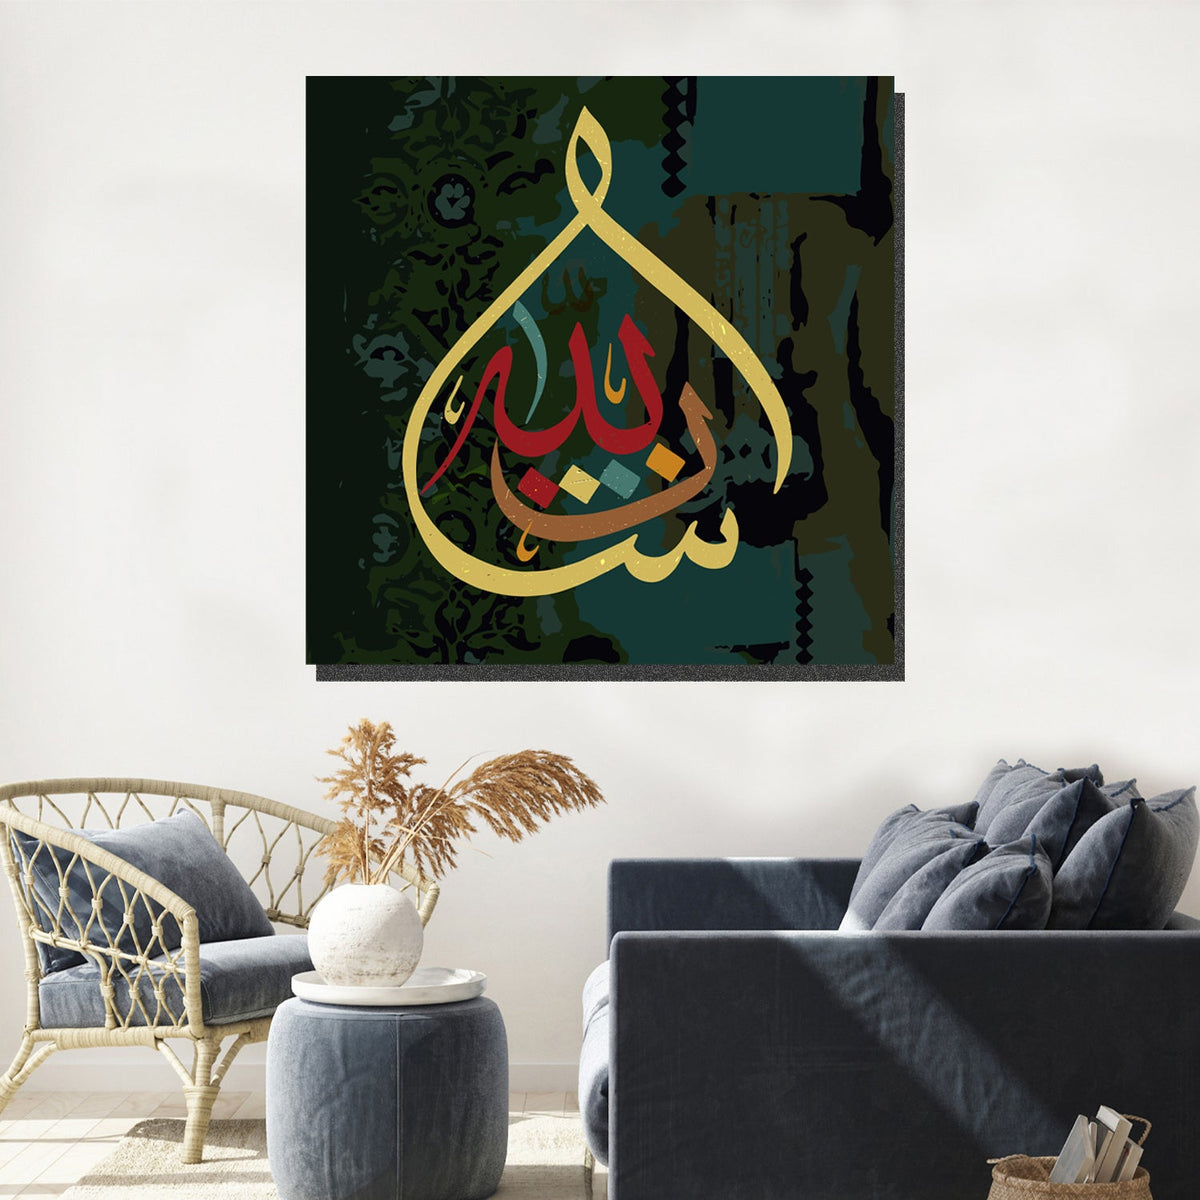 https://cdn.shopify.com/s/files/1/0387/9986/8044/products/MashaAllahCanvasArtprintStretched-2.jpg